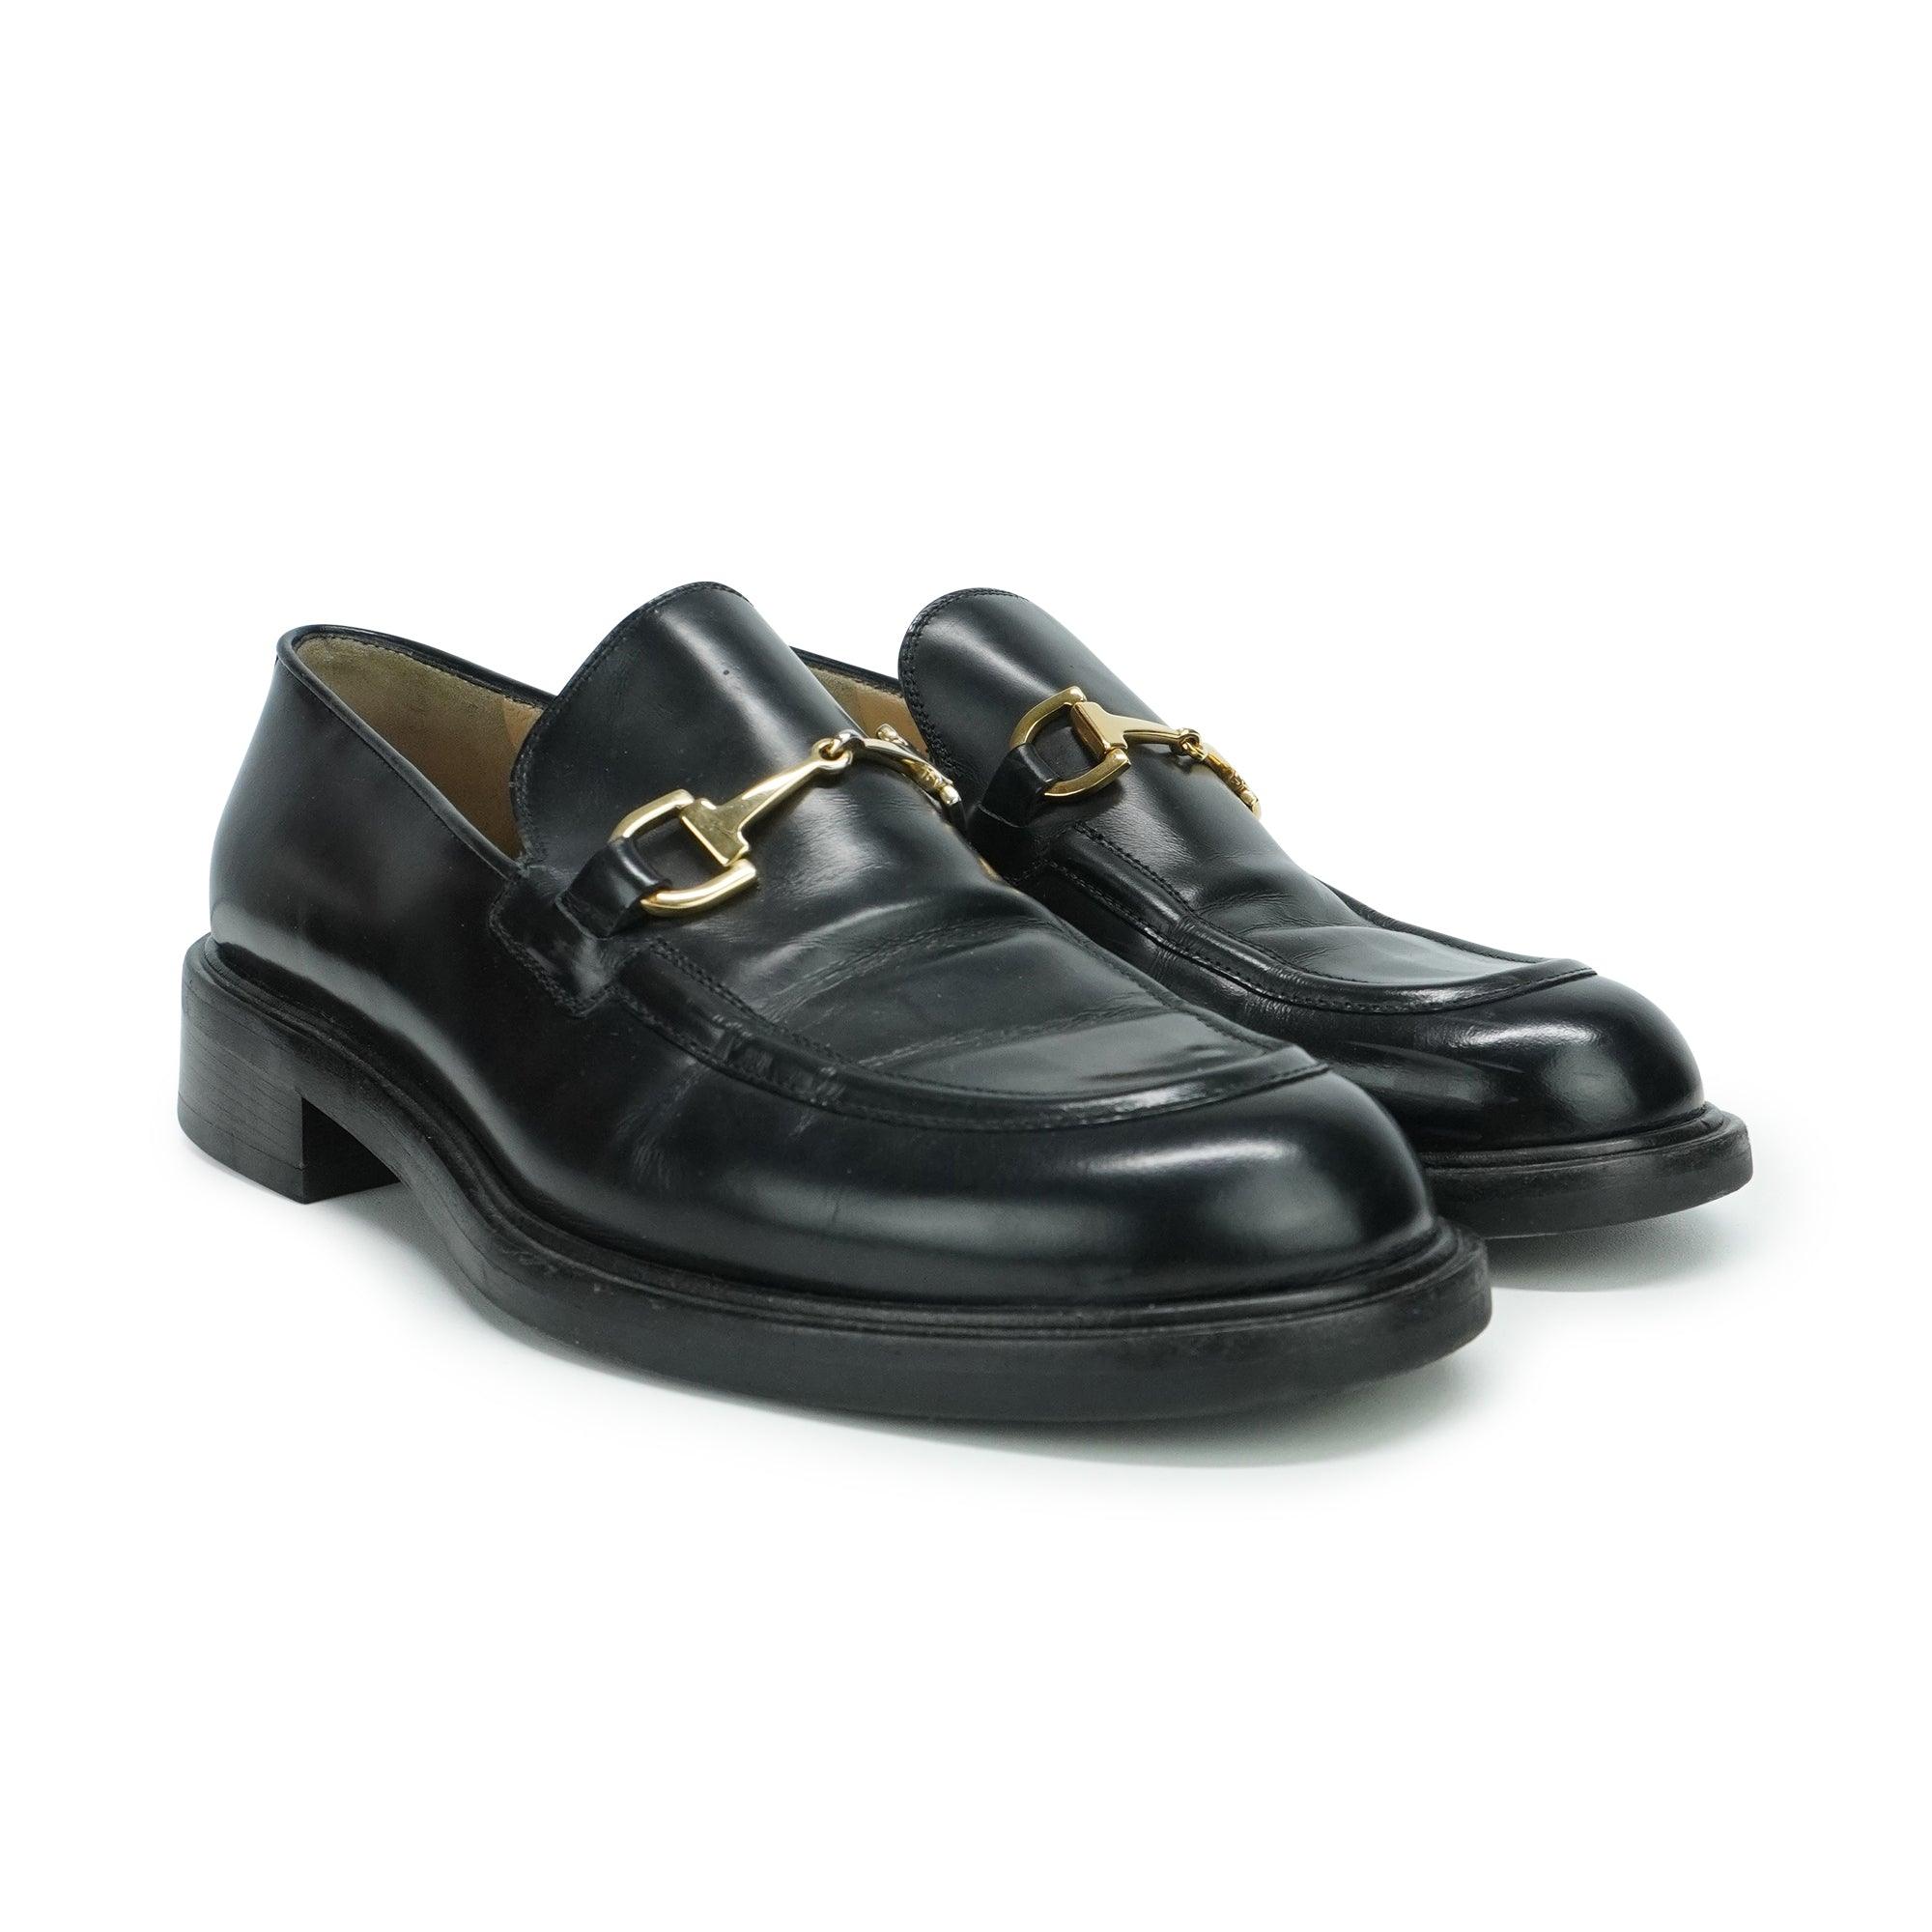 Gucci Loafers - Women's 36.5 - Fashionably Yours